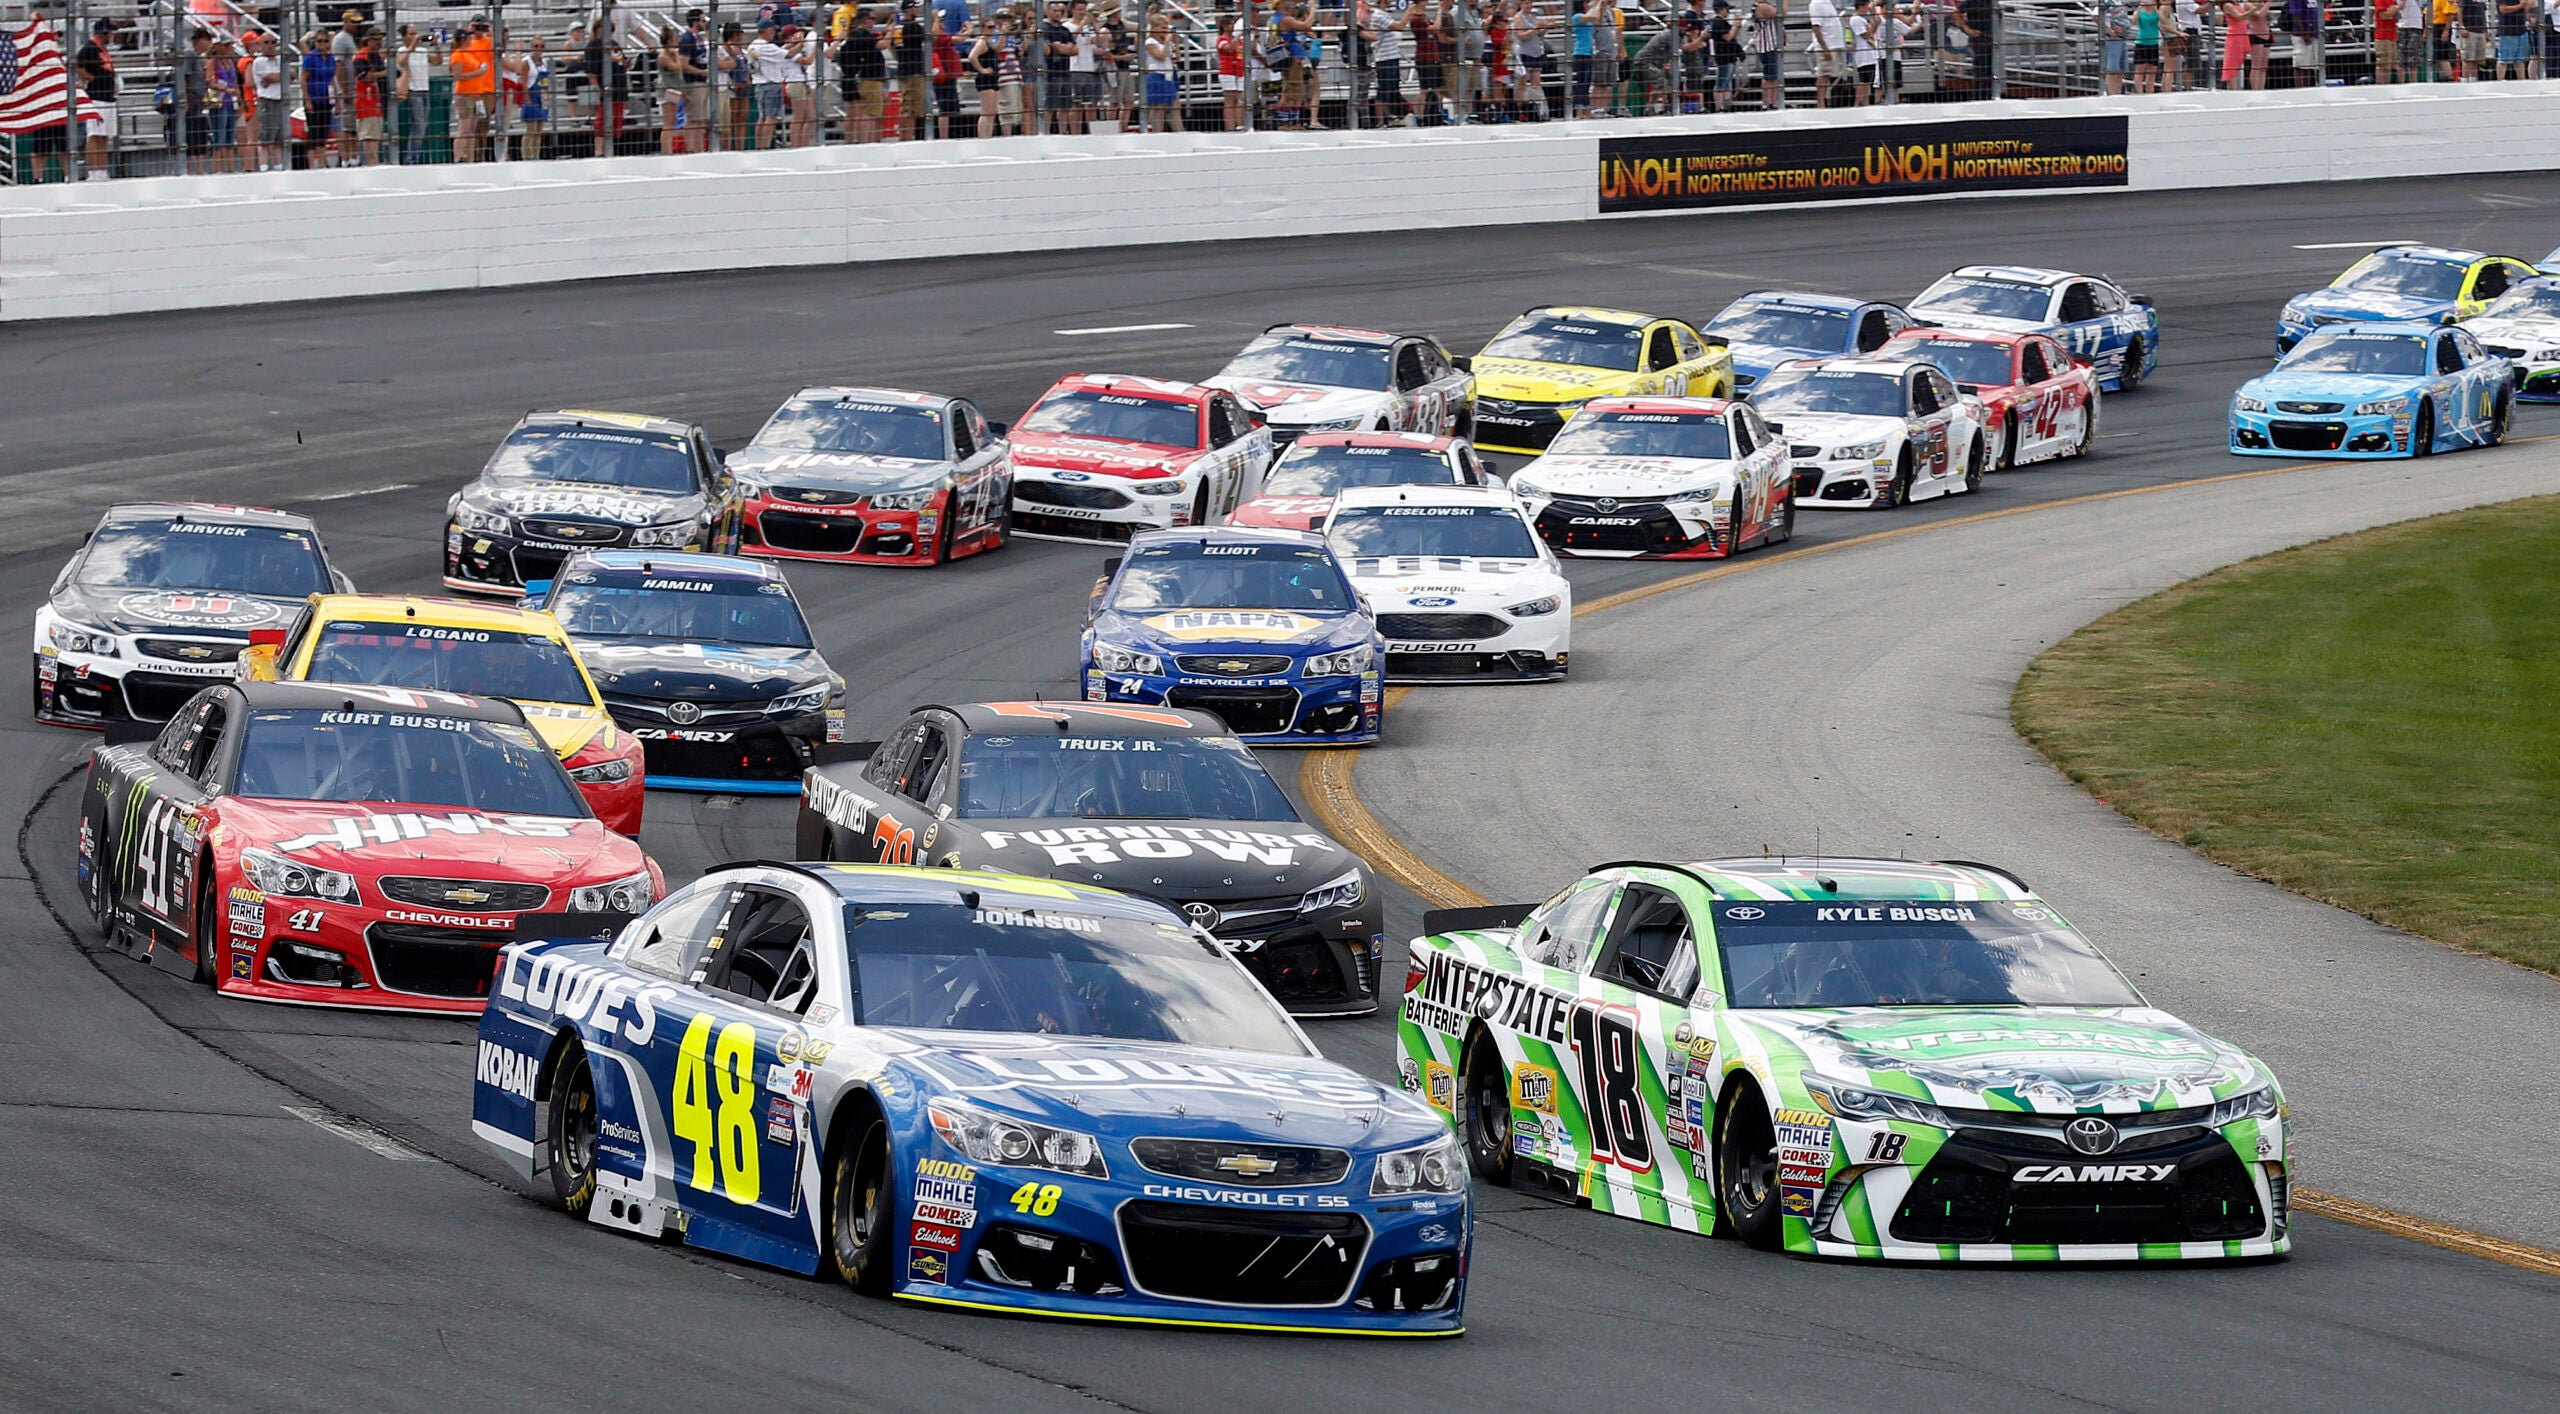 This New England NASCAR track is among the best in the country